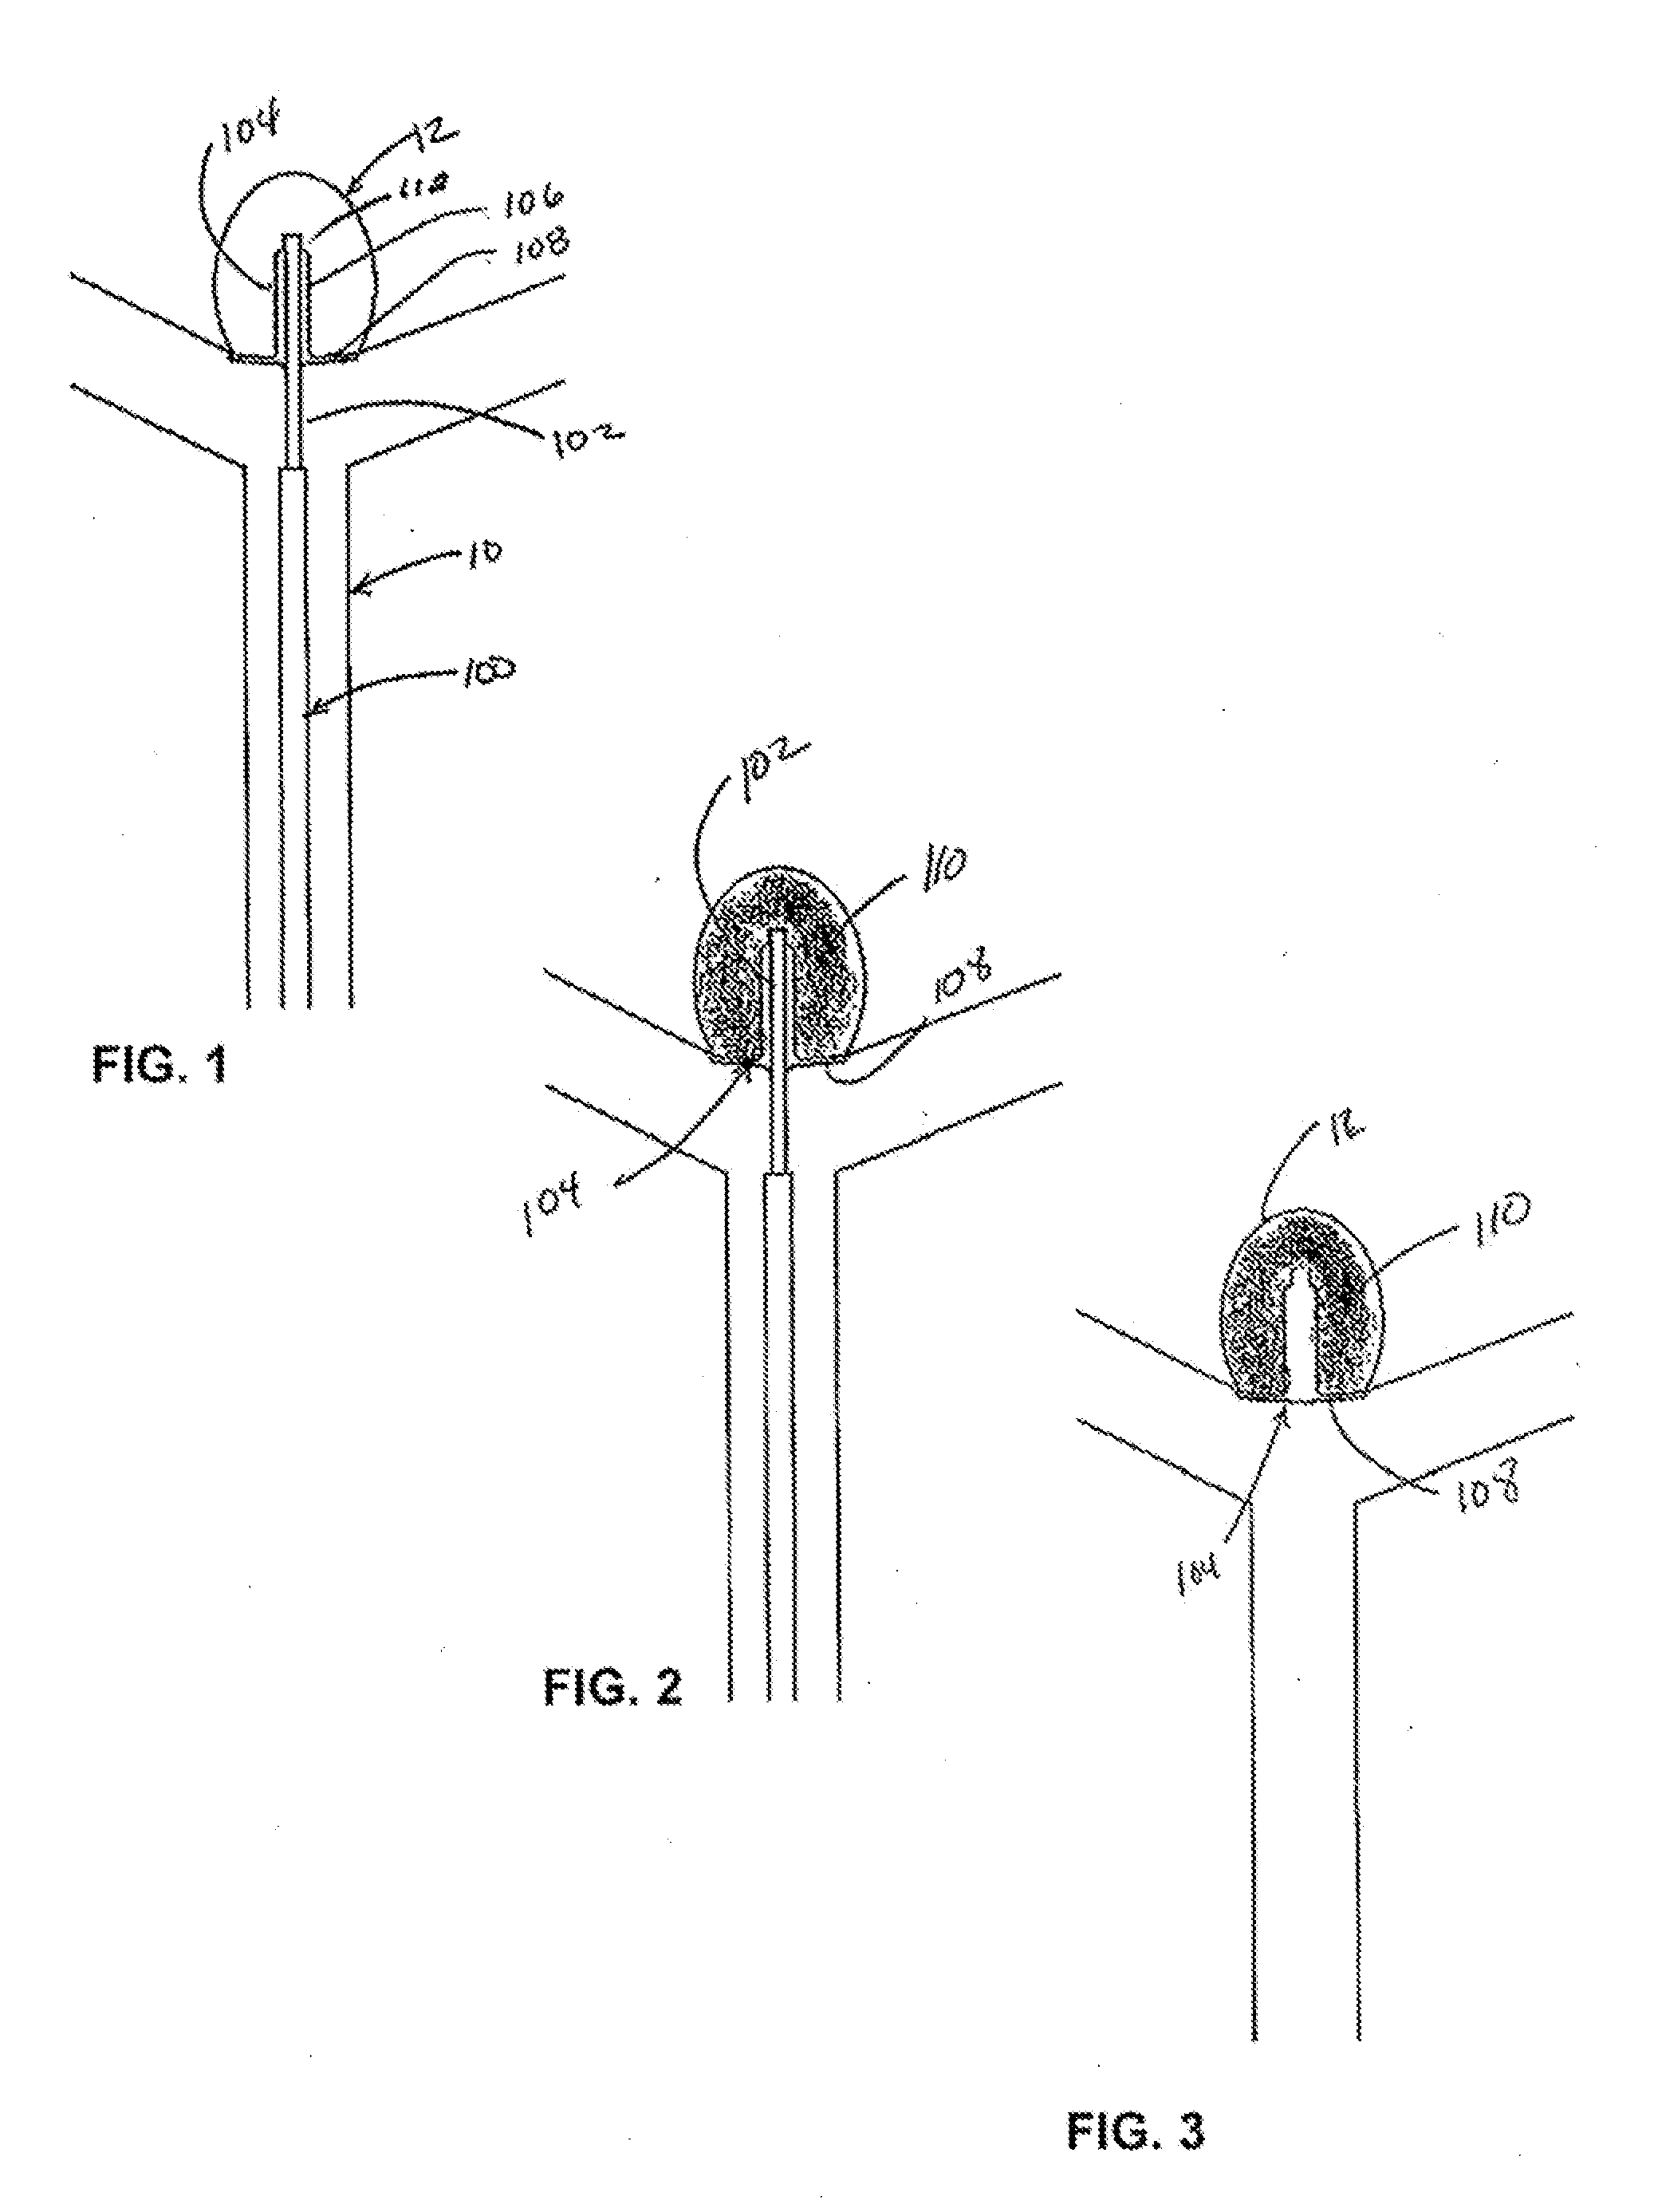 Aneurysm cover device for embolic delivery and retention